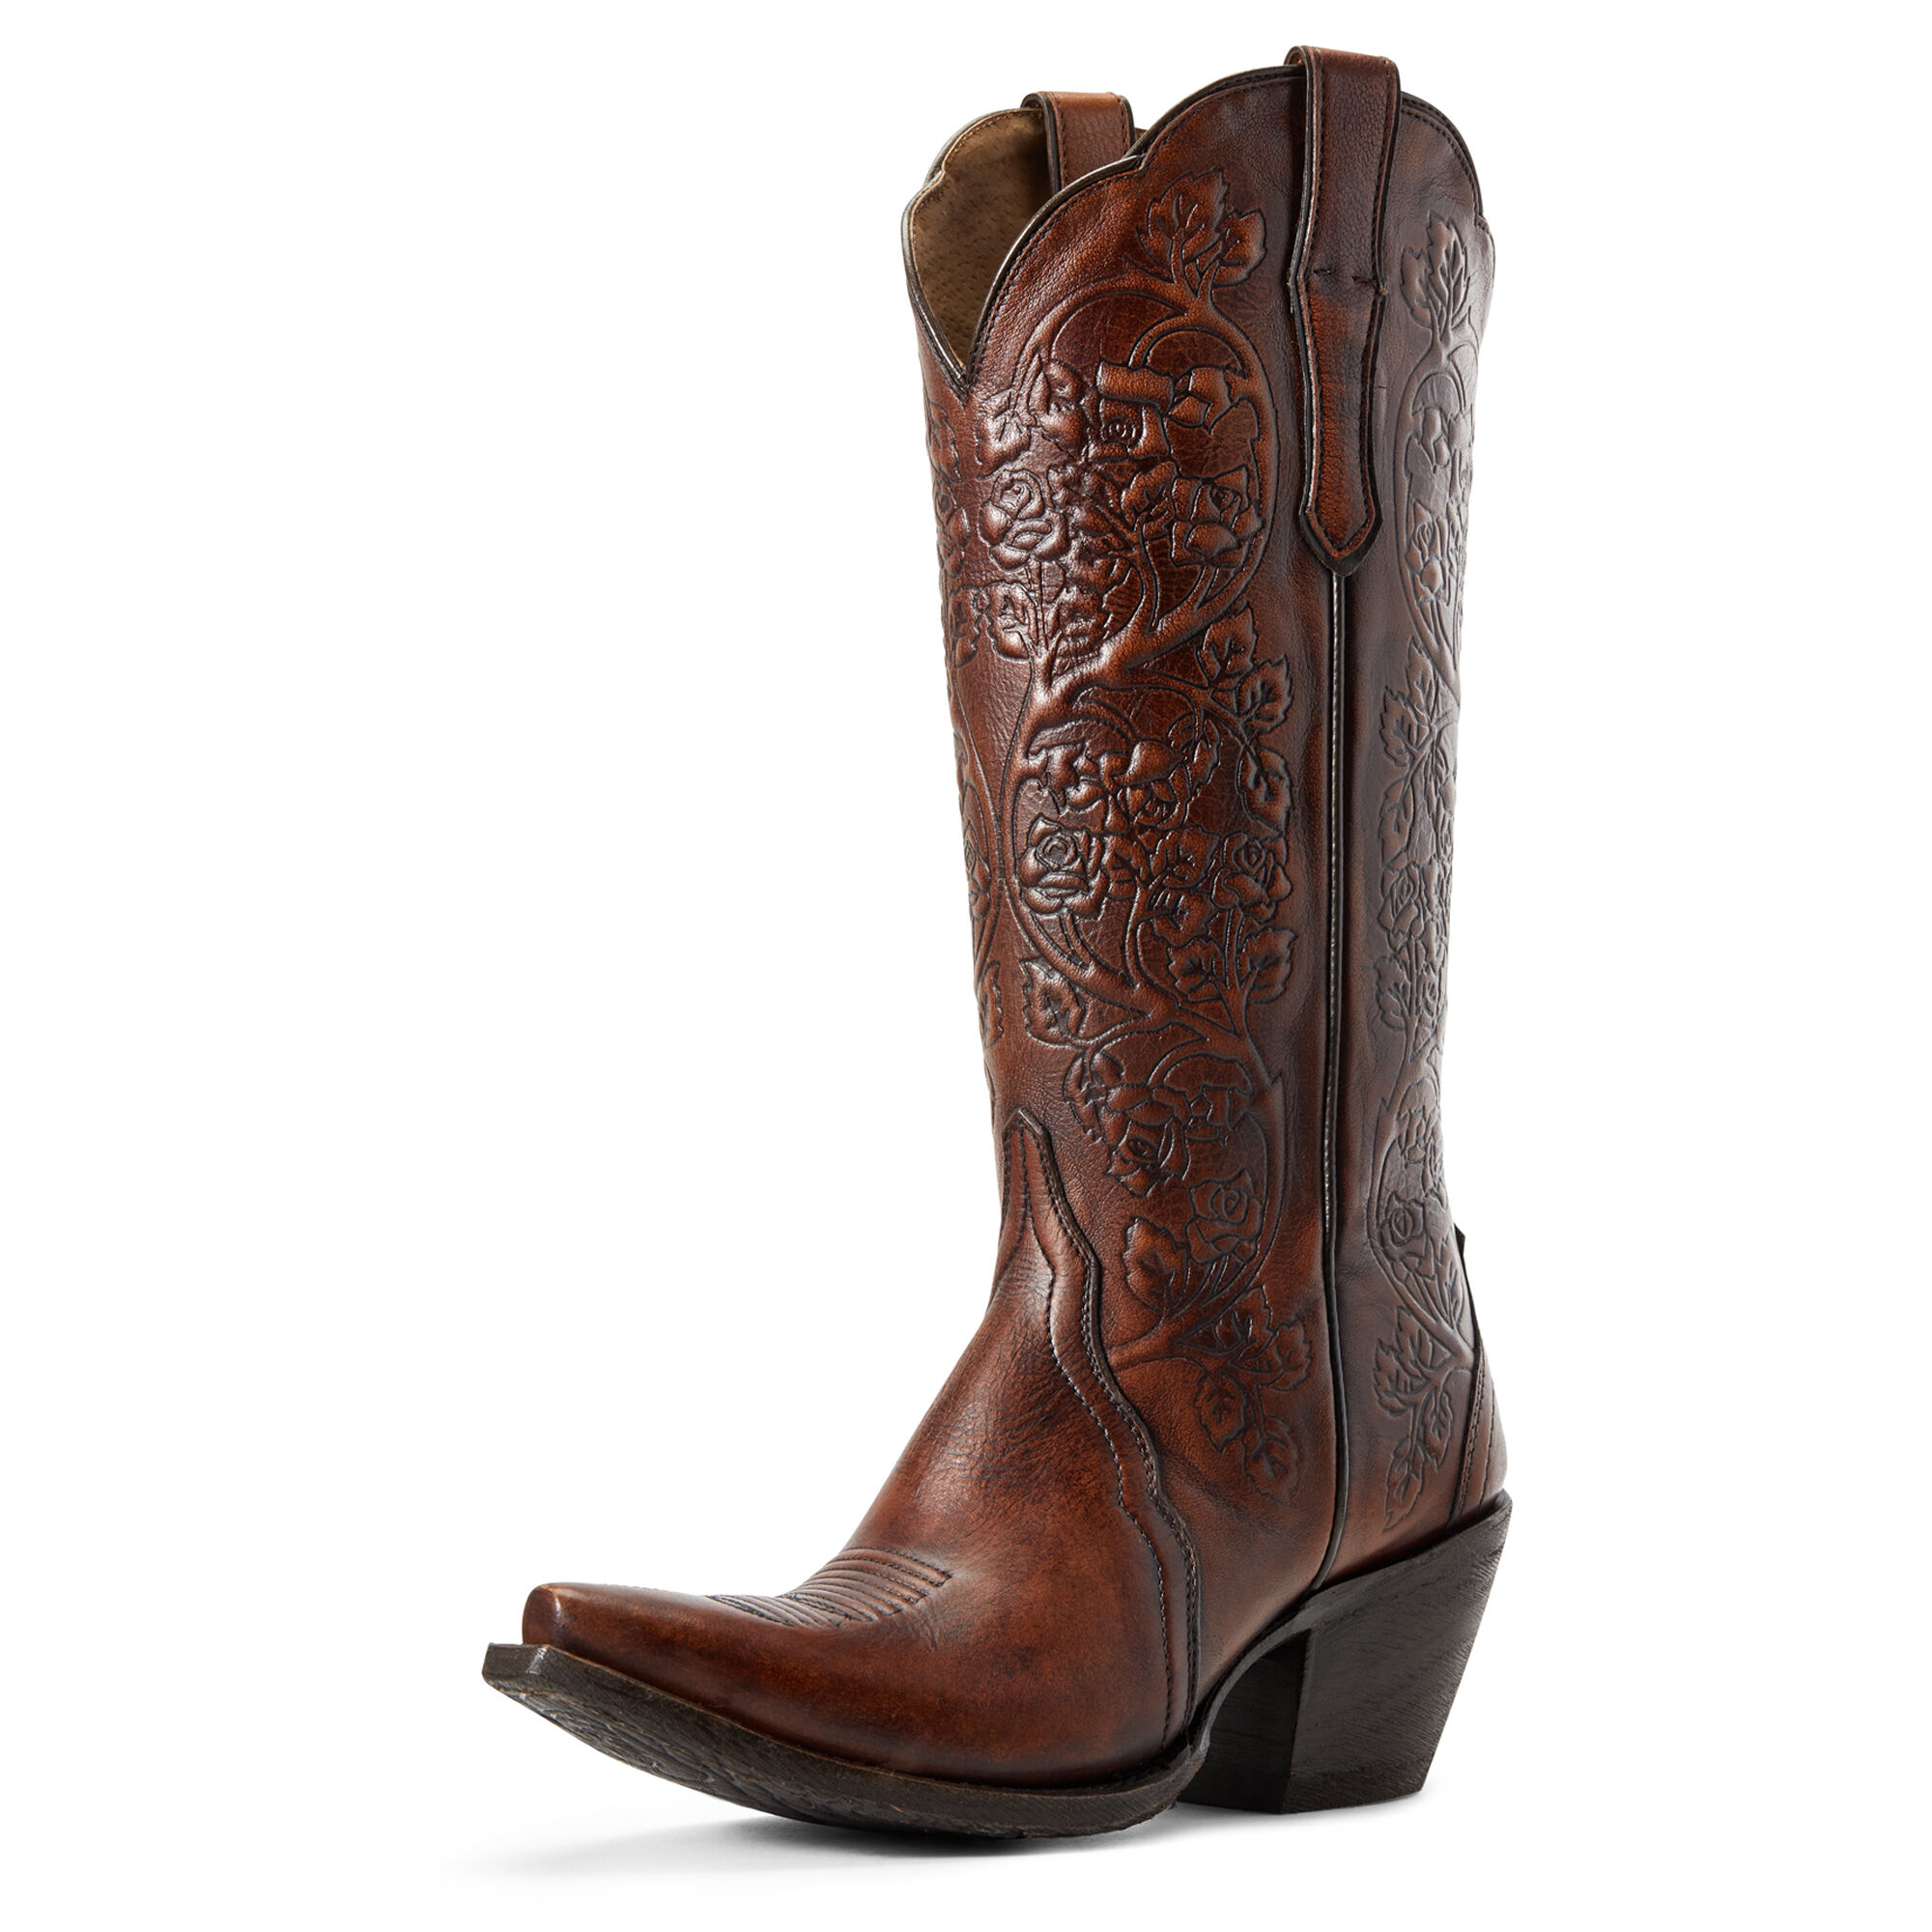 Women's Platinum Western Boots in Rich Cognac Leather  by Ariat